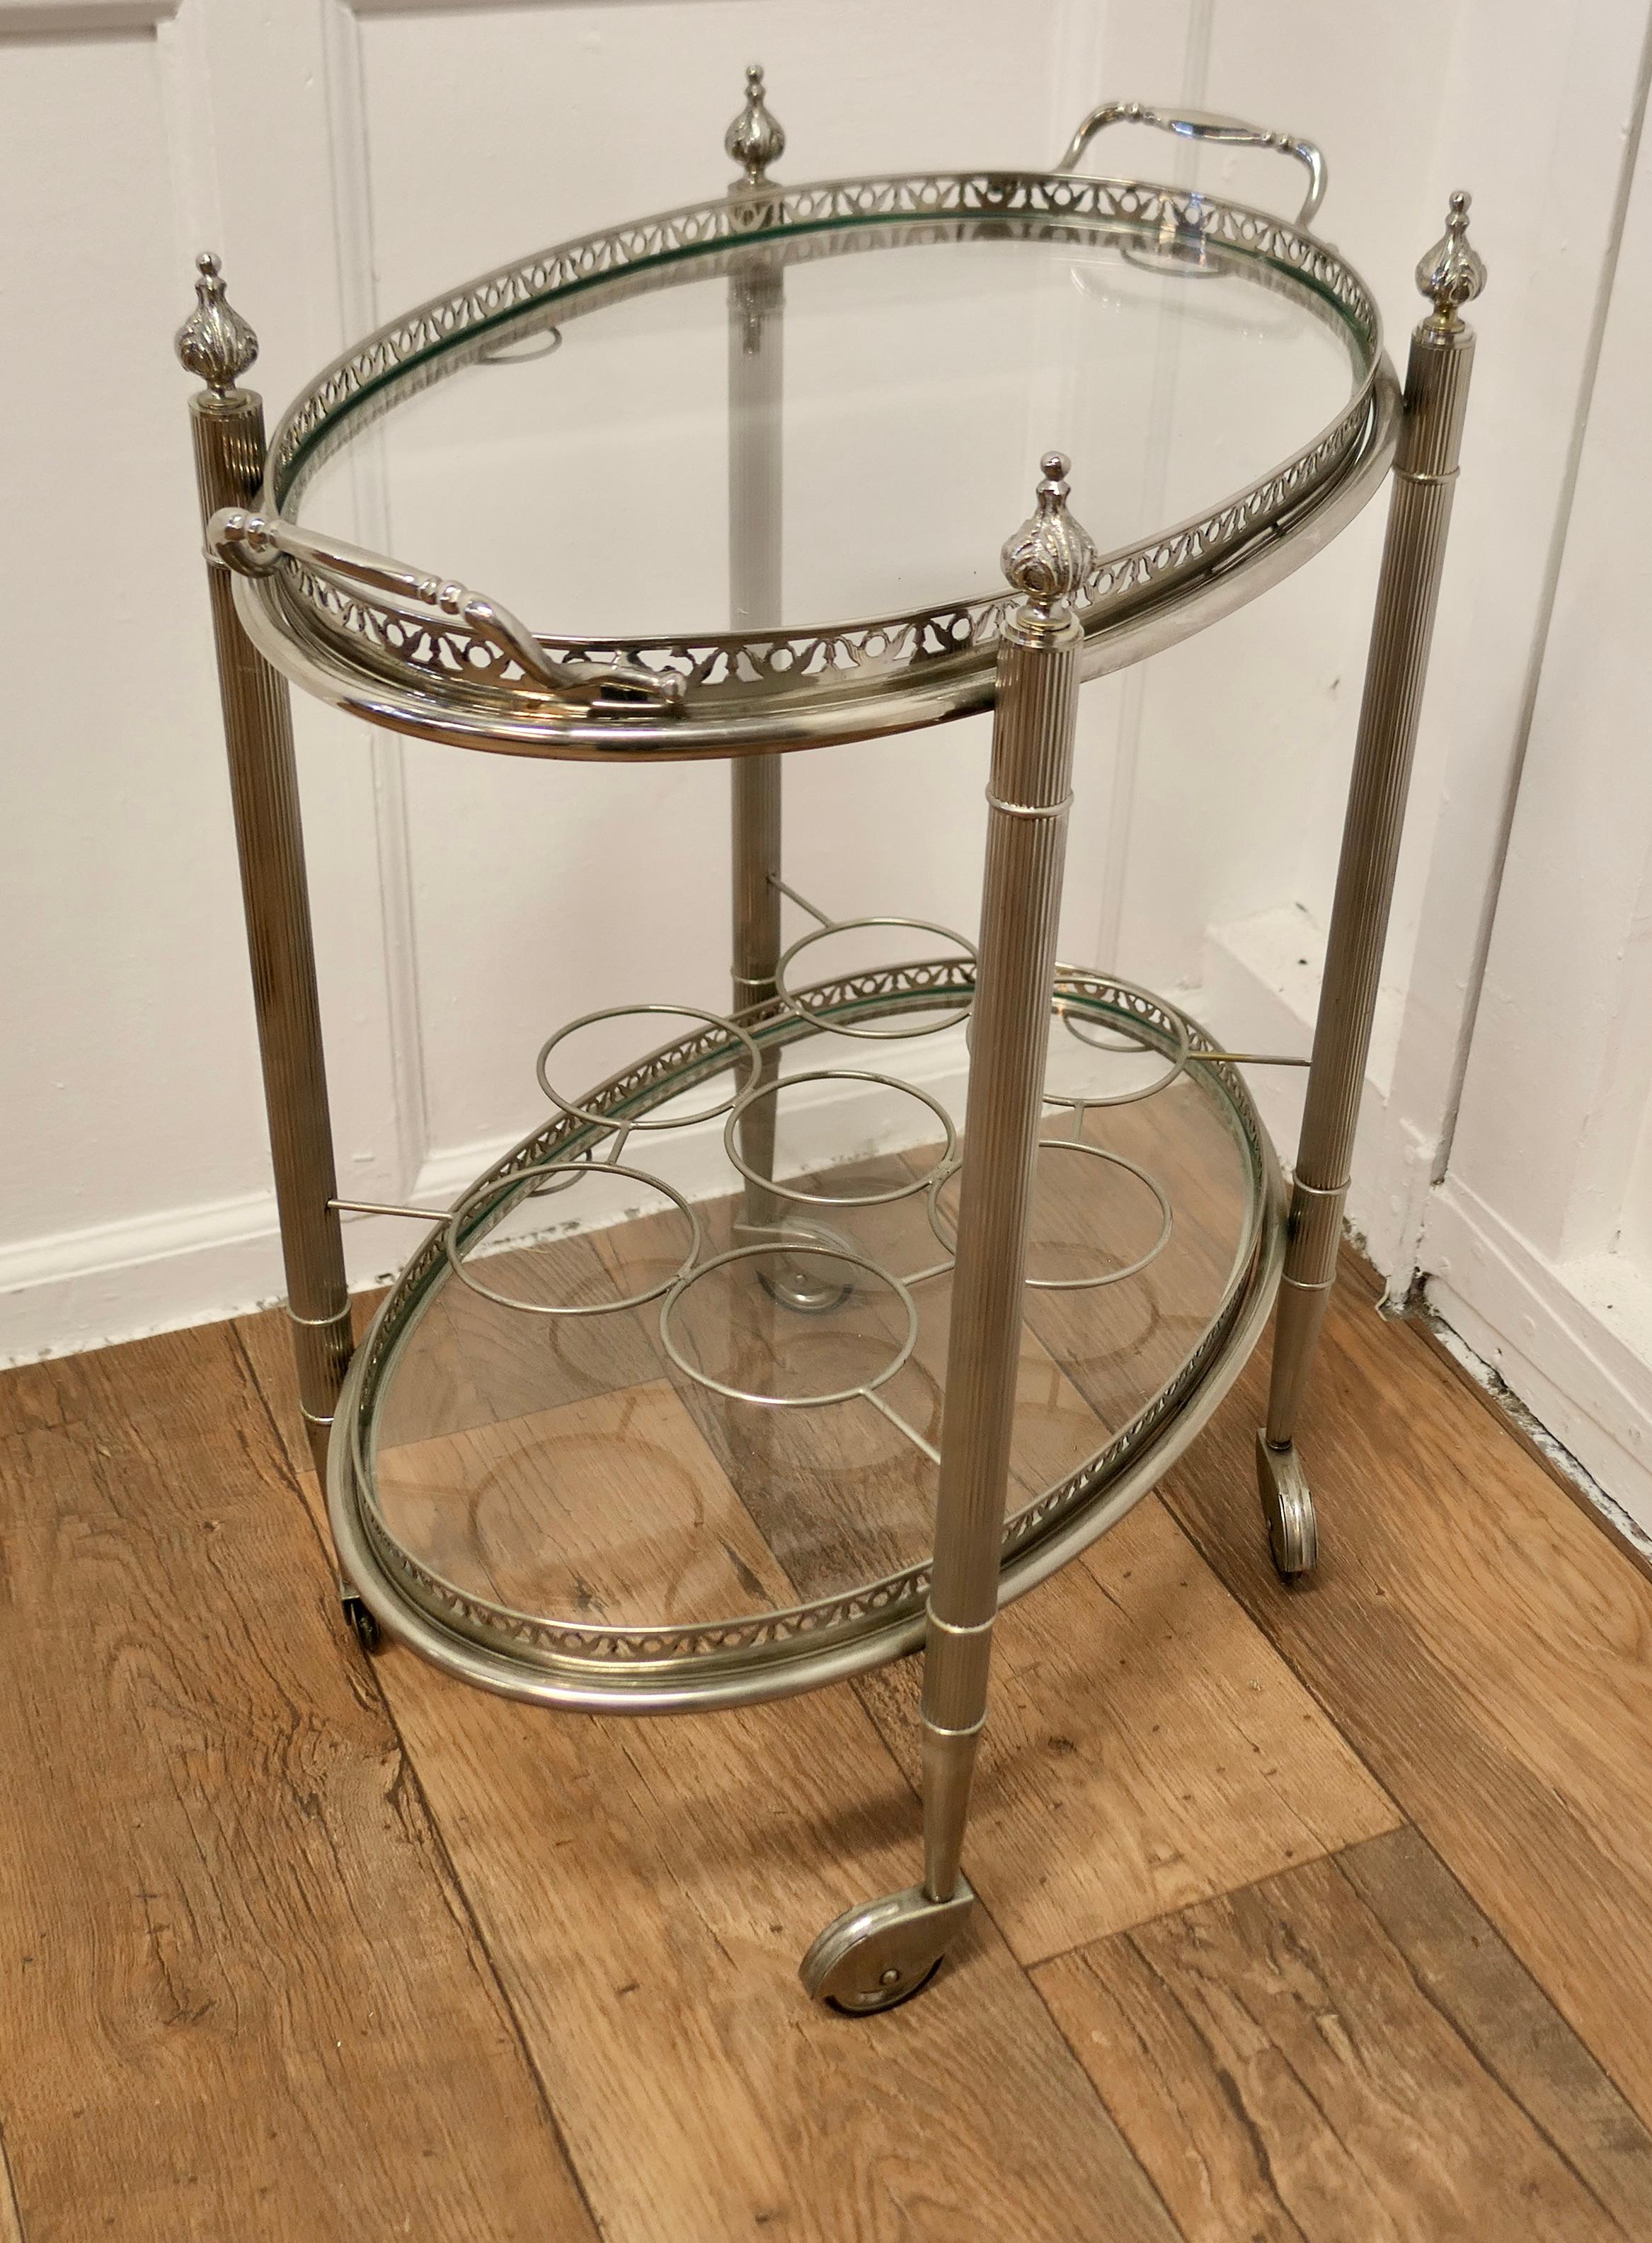 Vintage Art Deco Silver Drinks Trolley with Glass Tray a Very Decorative Piece 1